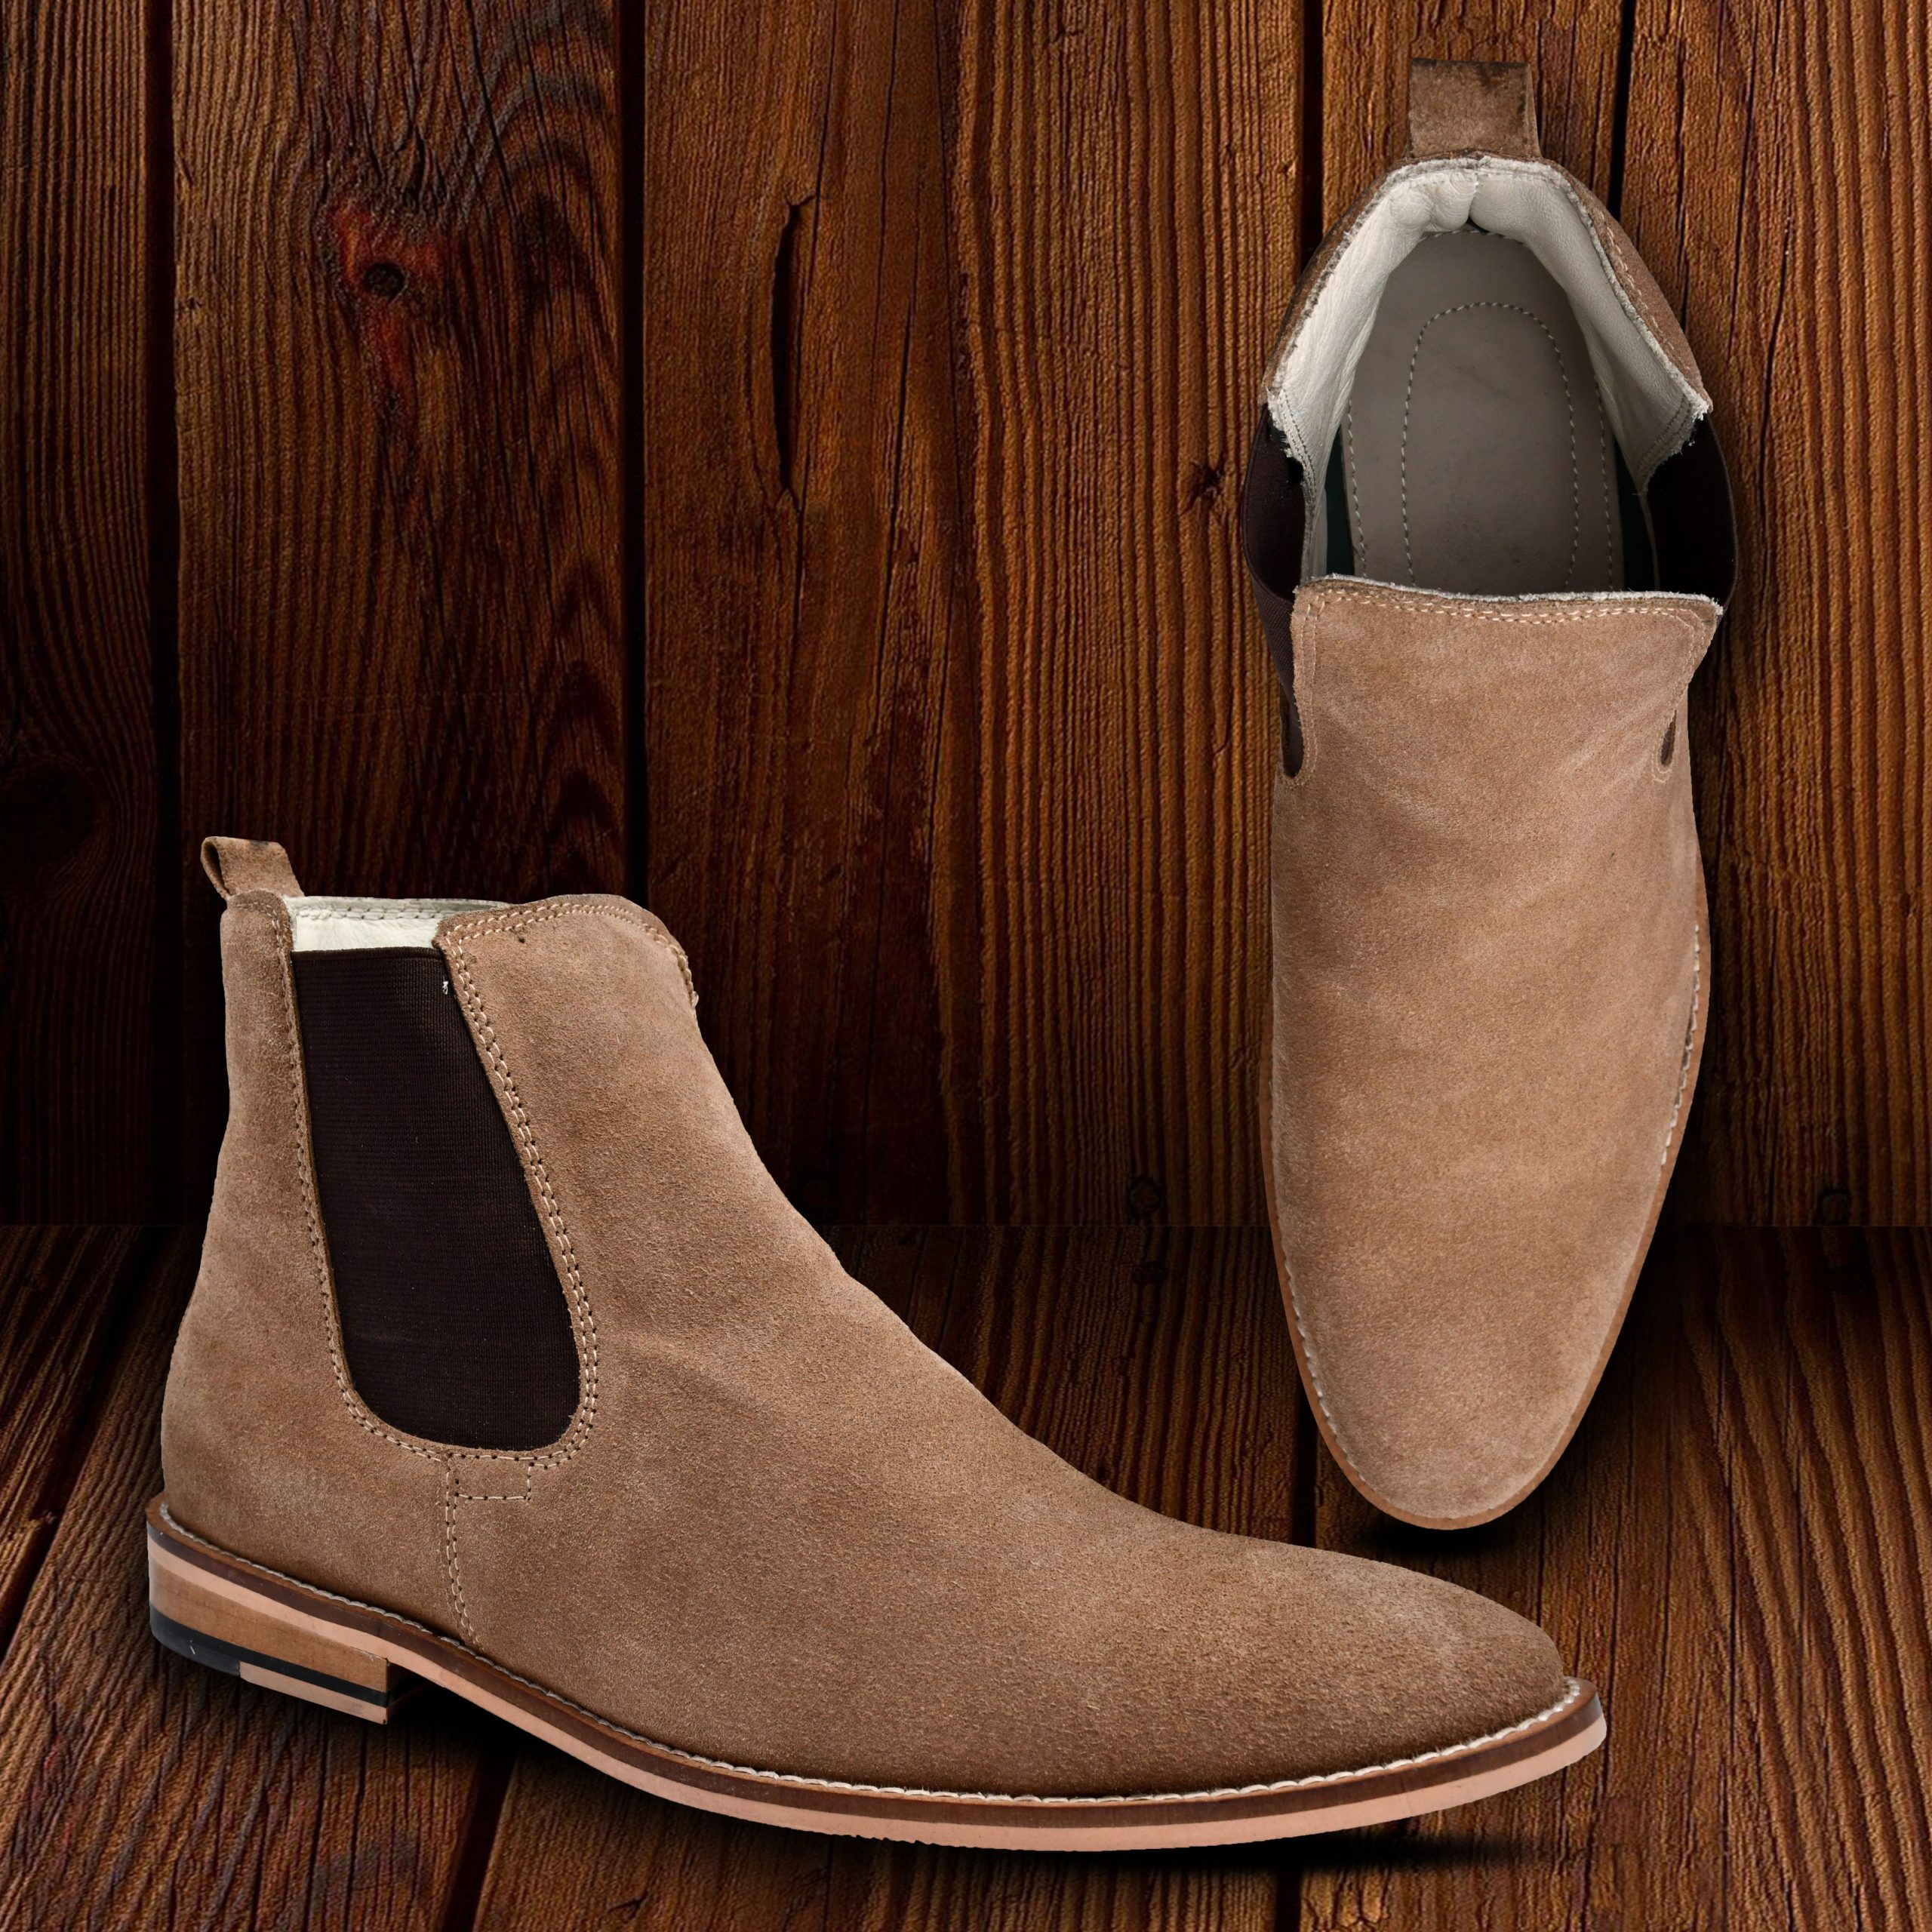 Boots - Buy 6 inches Pure Turquoise Suede Leather Chelsea Boots online at Factory Prices. | Agra Shoe Mart